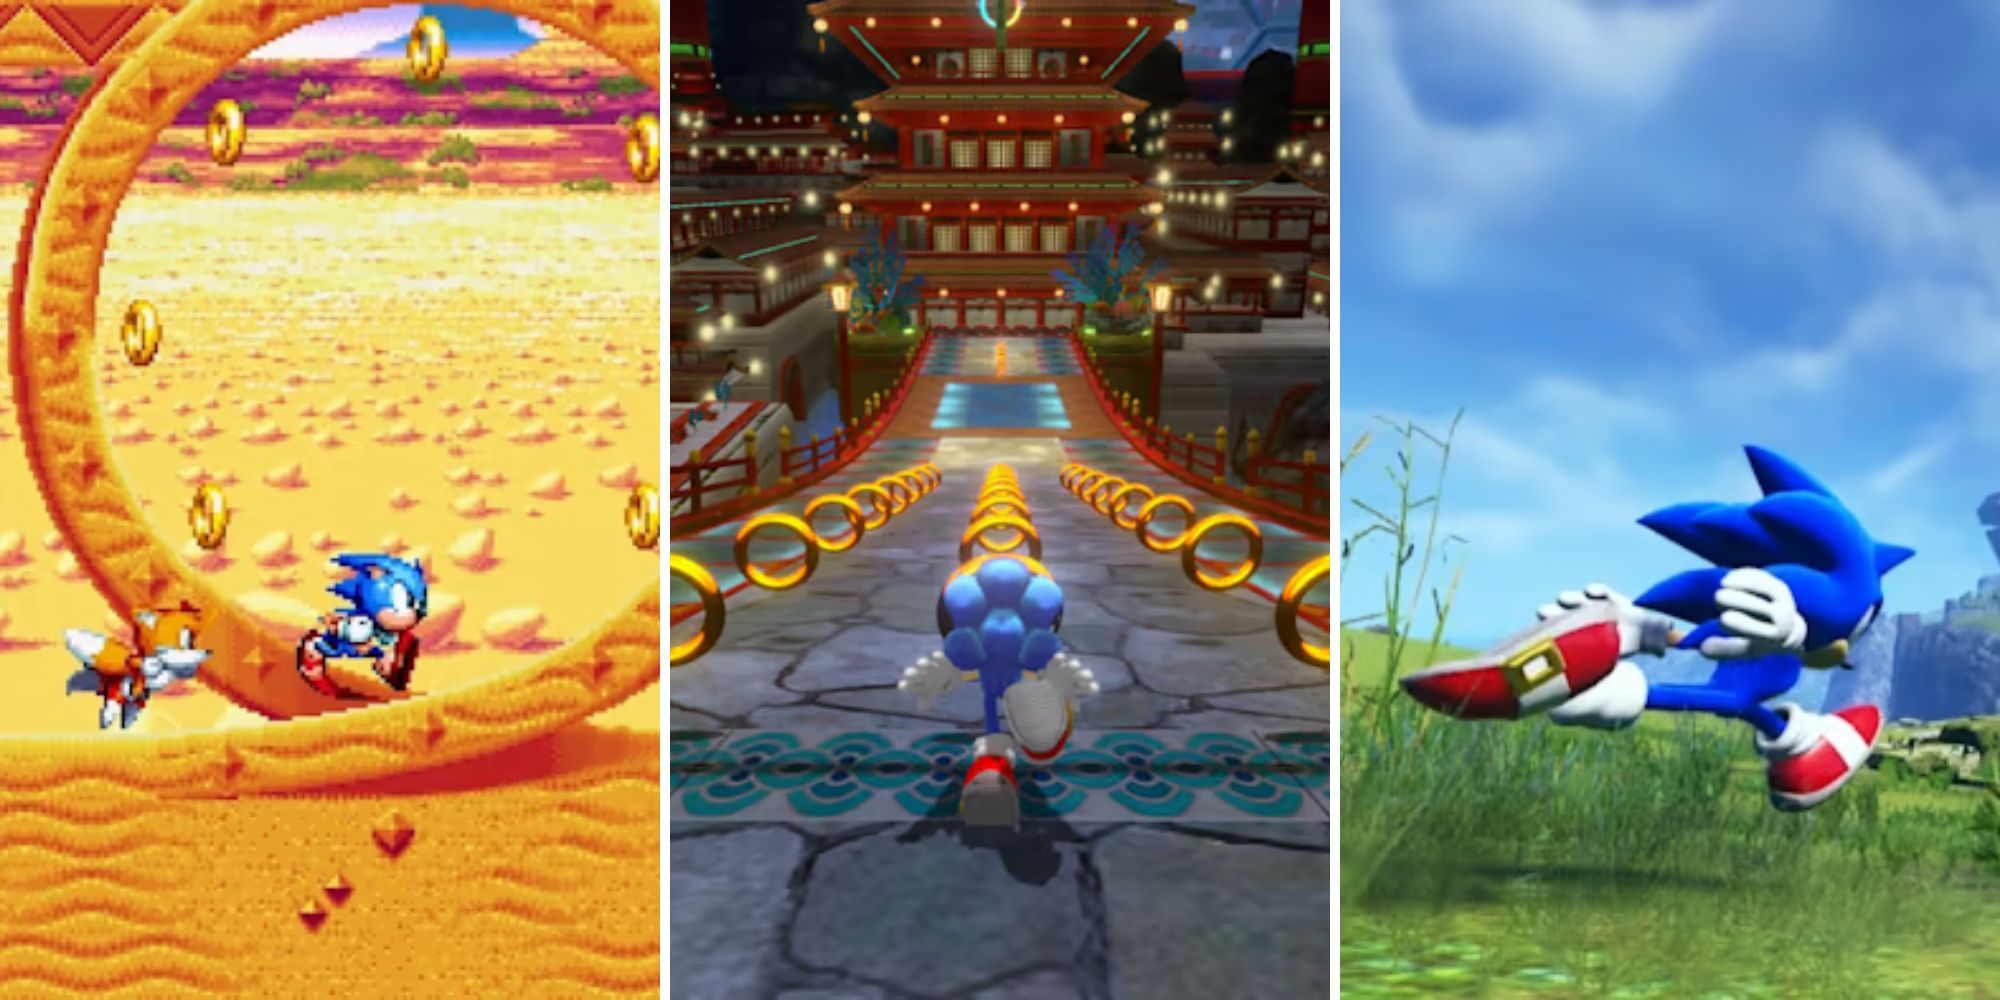 The 10 Best Sonic Games